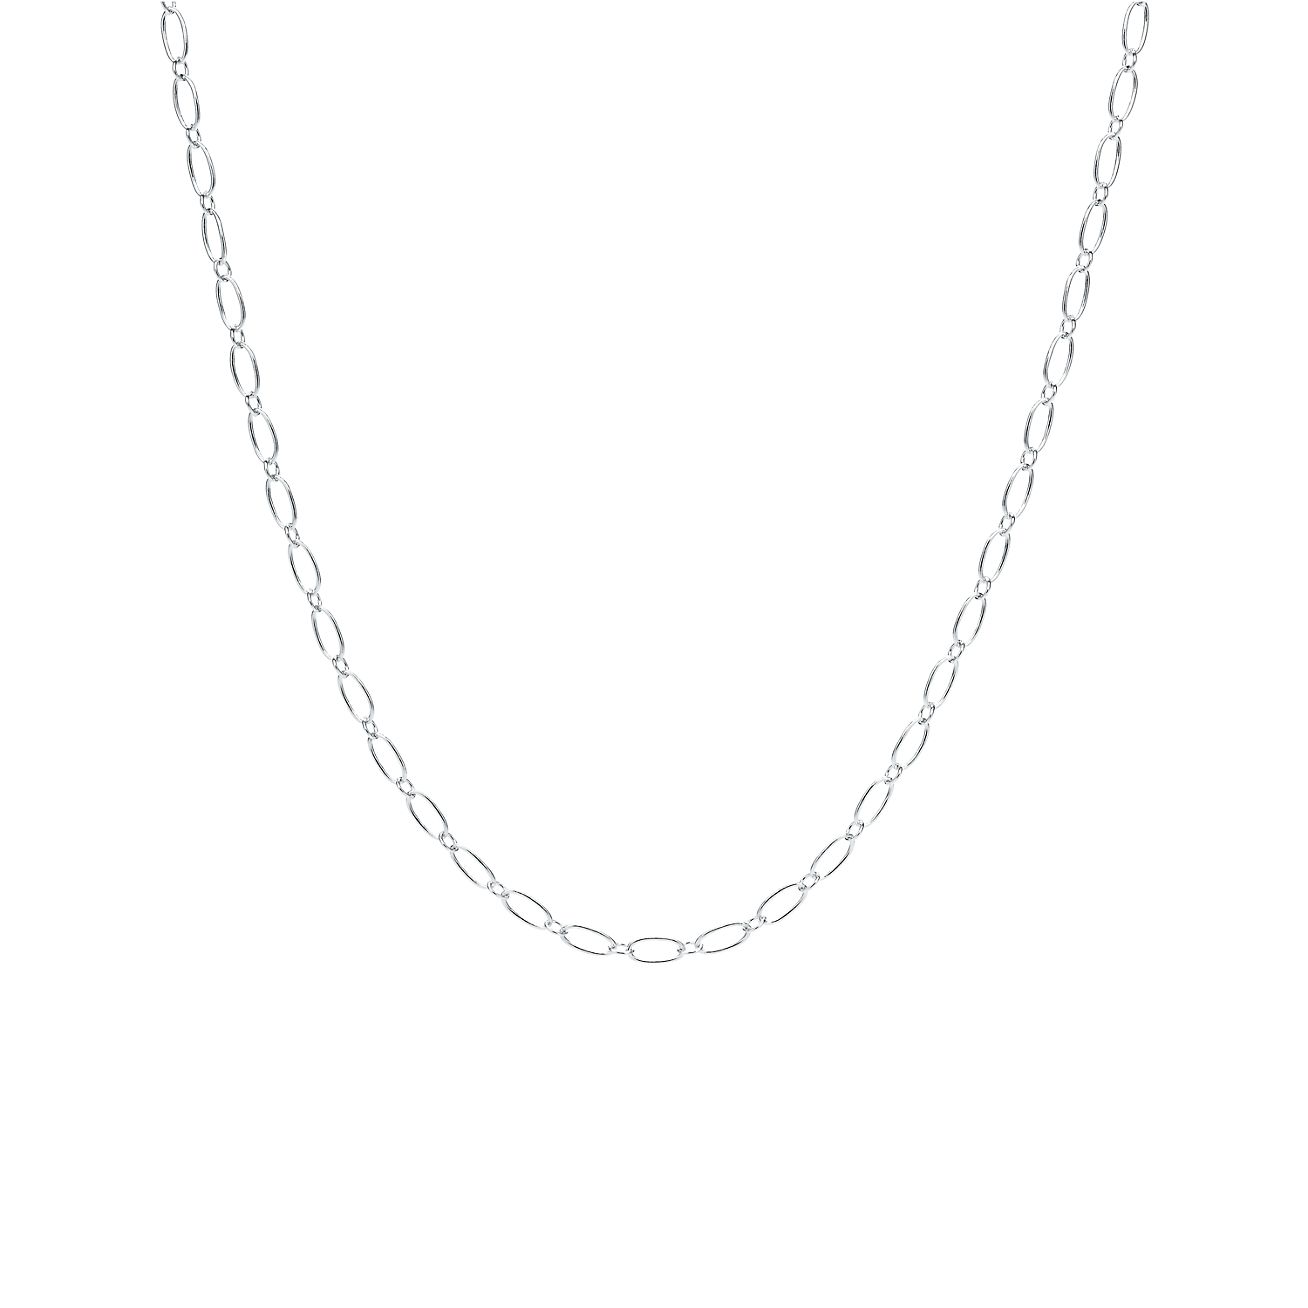 Oval link chain in 18k white gold, 18 